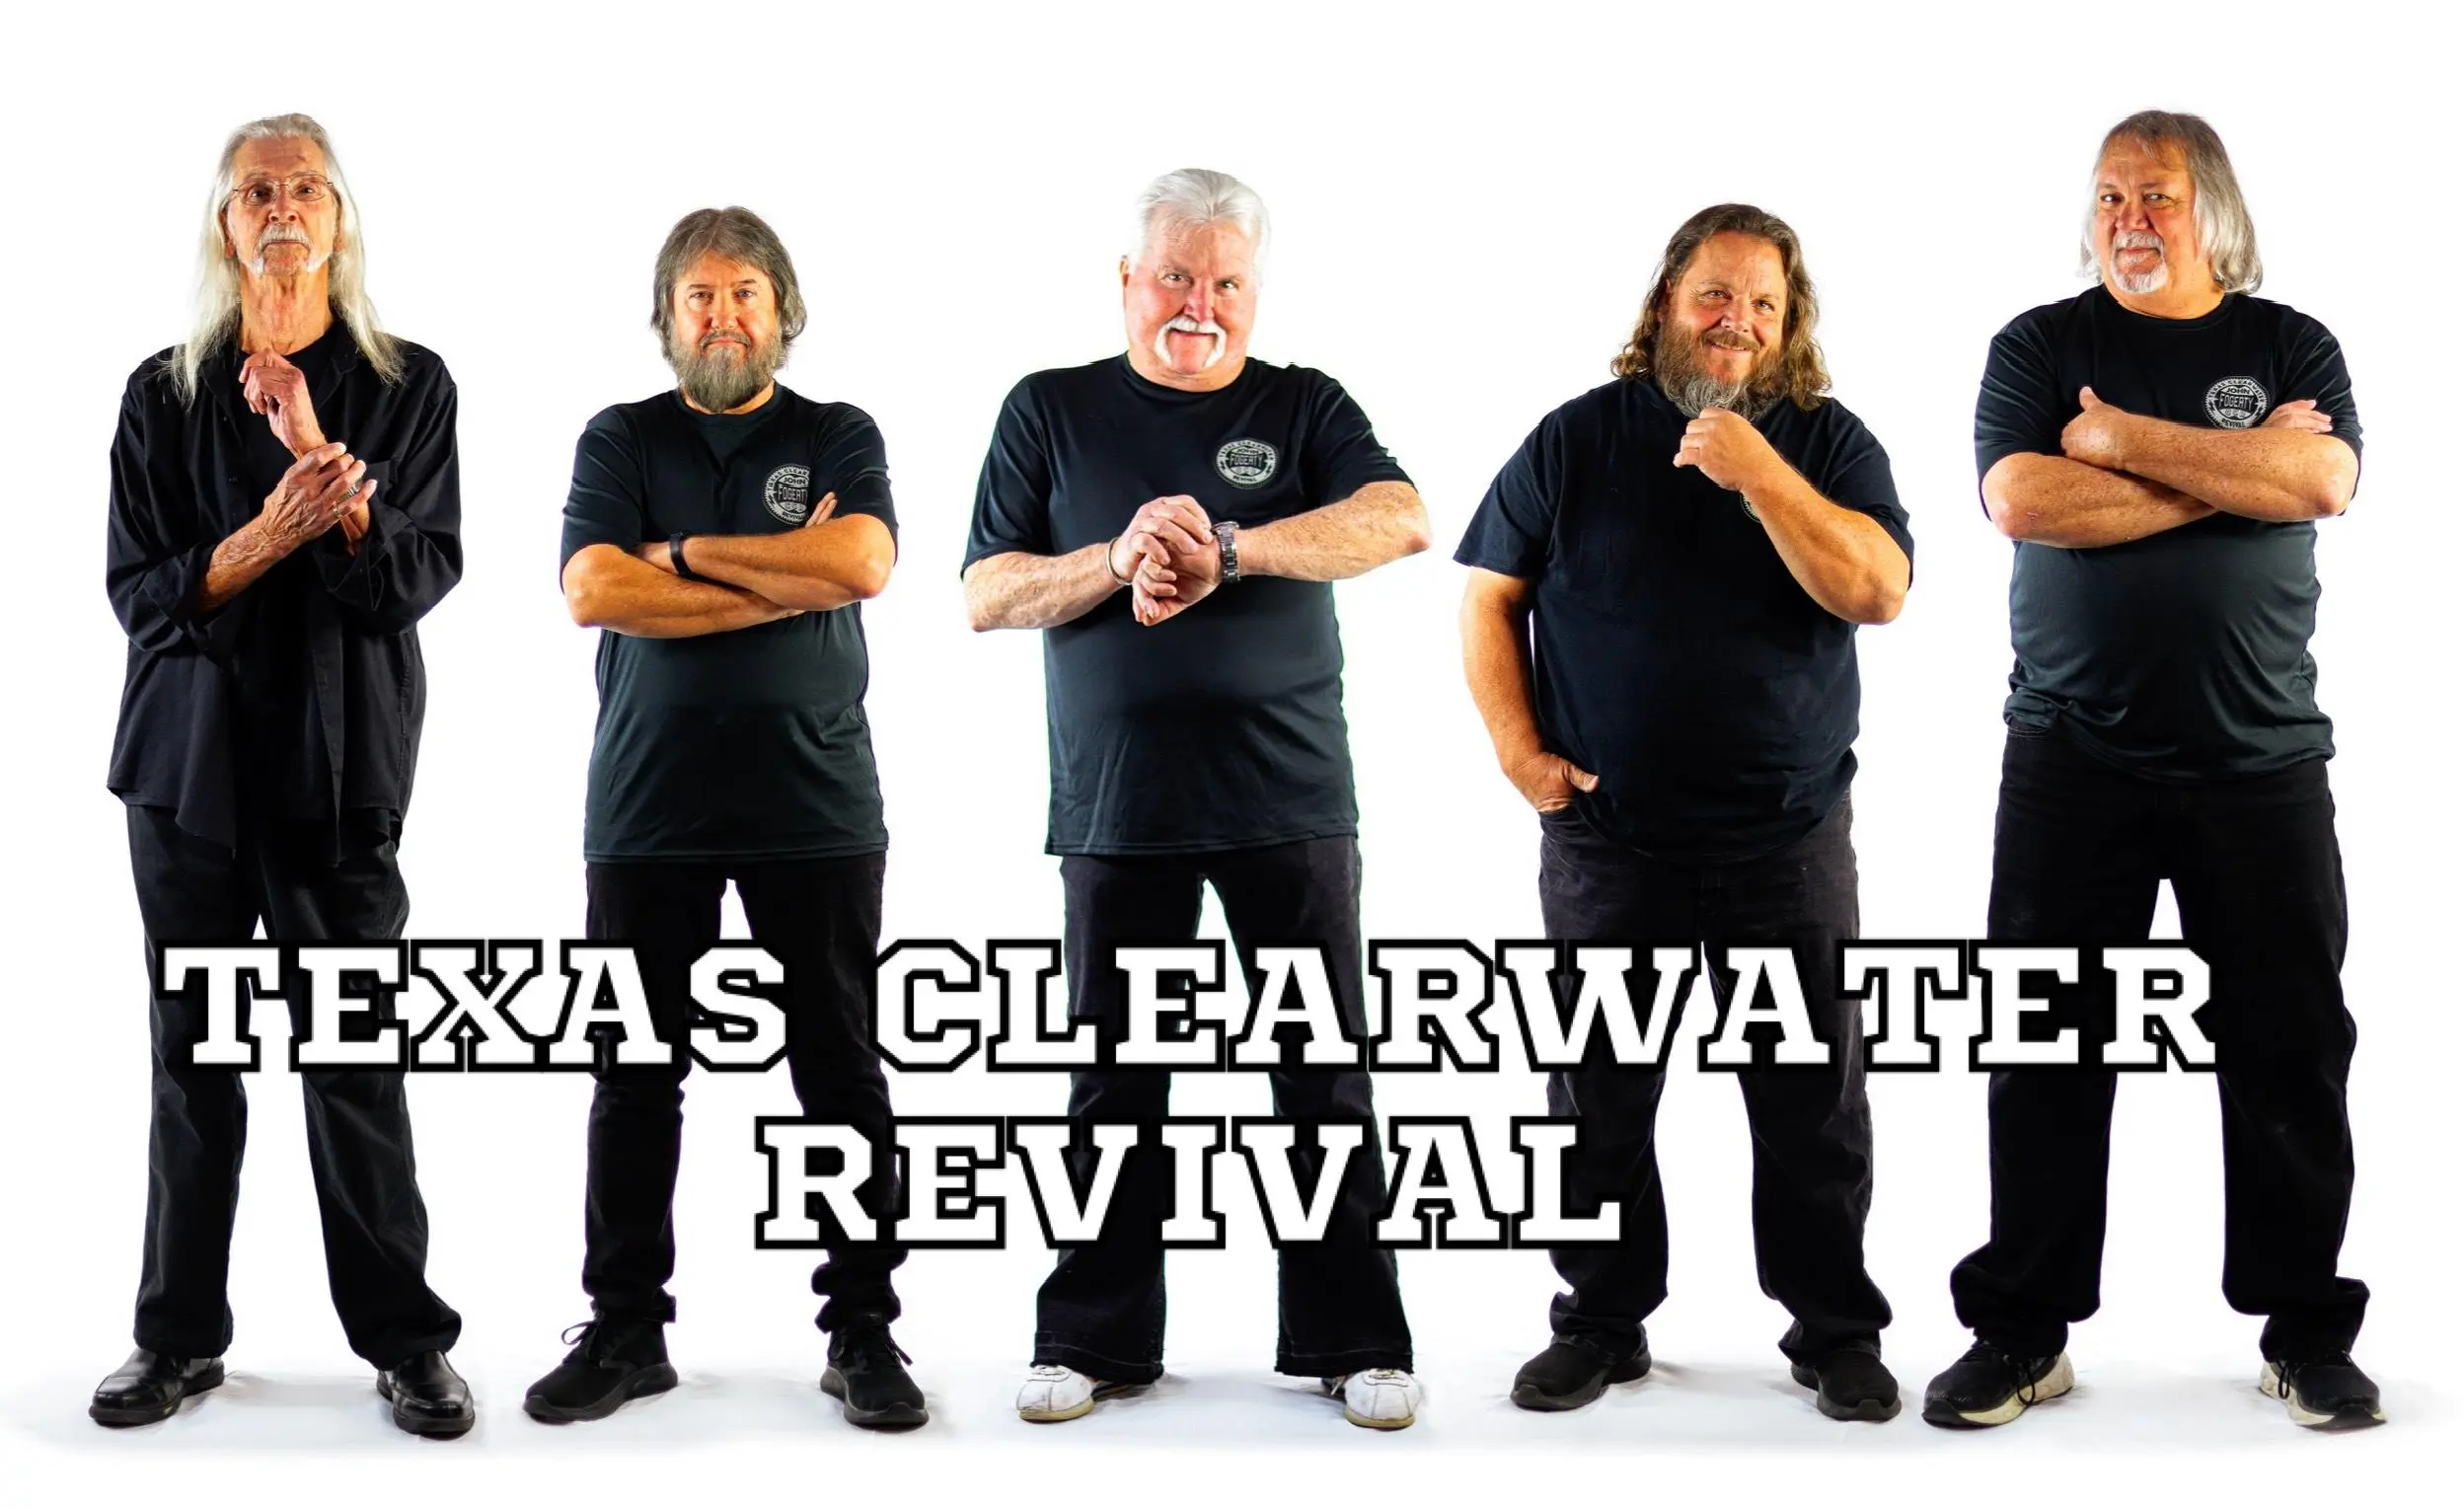 Texas Clearwater Revival